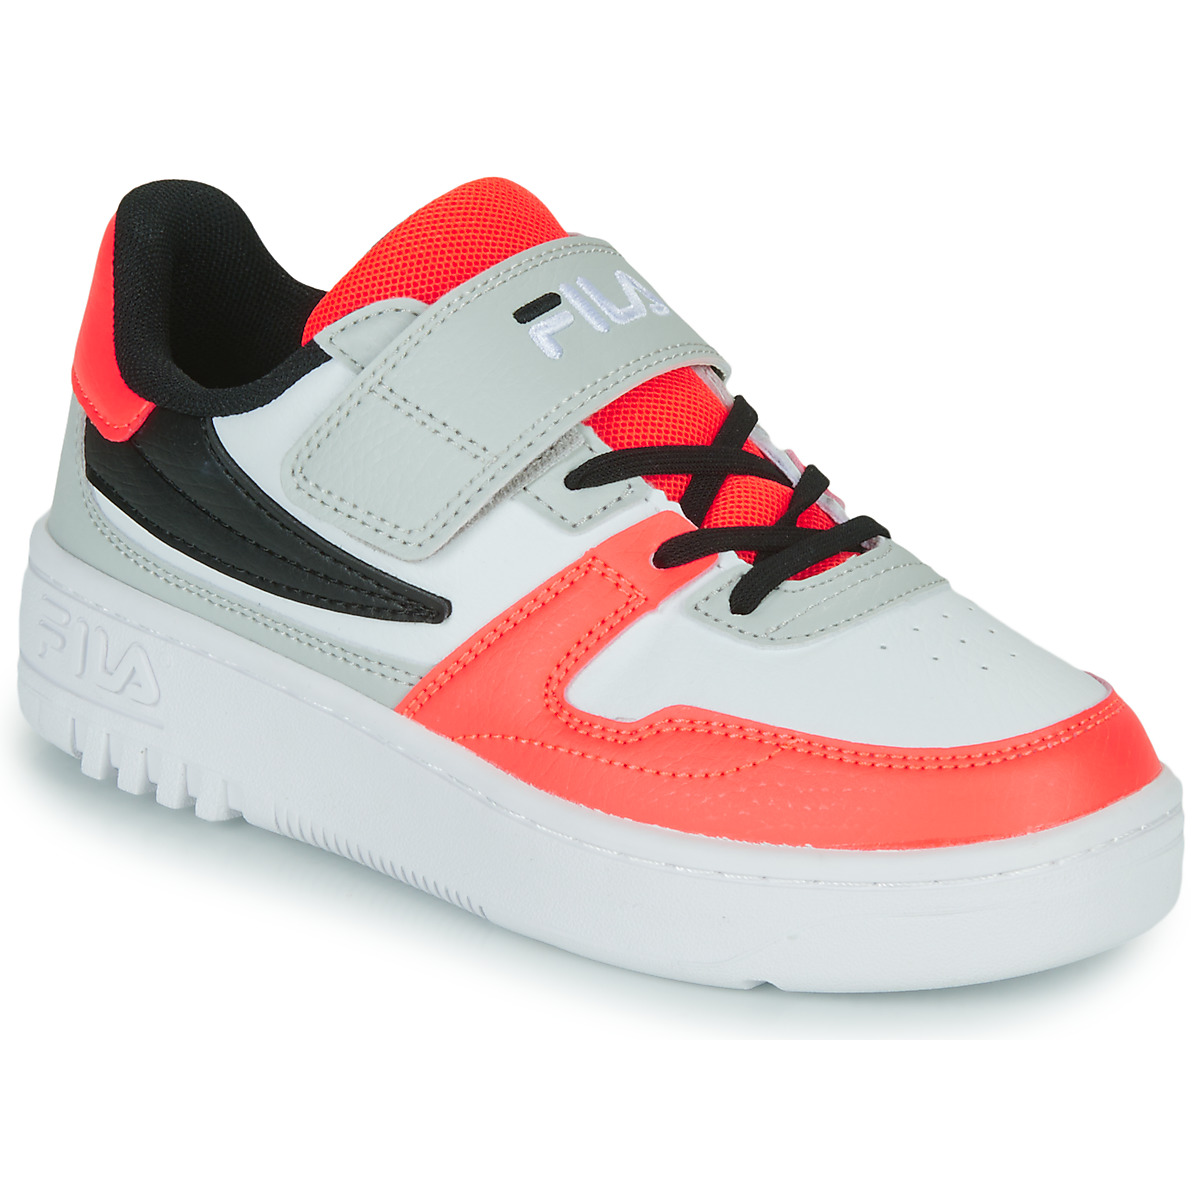 Shoes Fila Black Child - FXVENTUNO Spartoo ! trainers White velcro Low Red / Free NET | kids / - top Grey delivery /